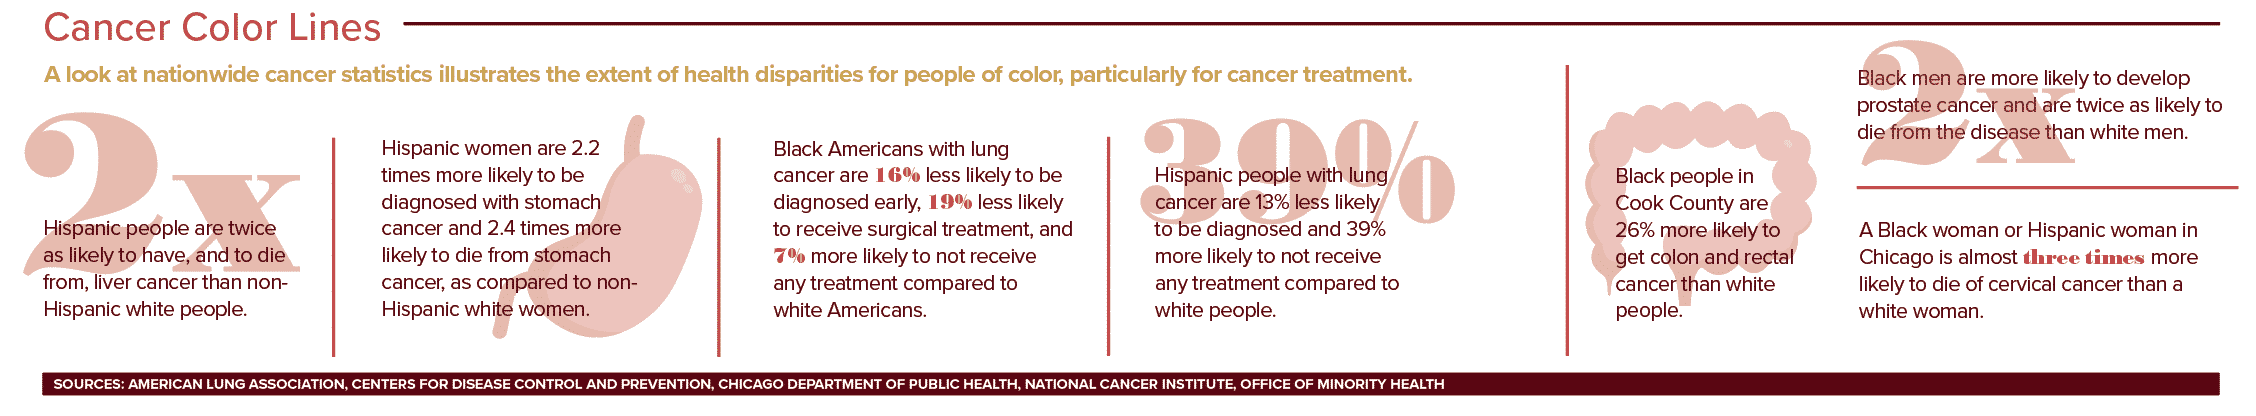 Cancer Color Lines Infographic